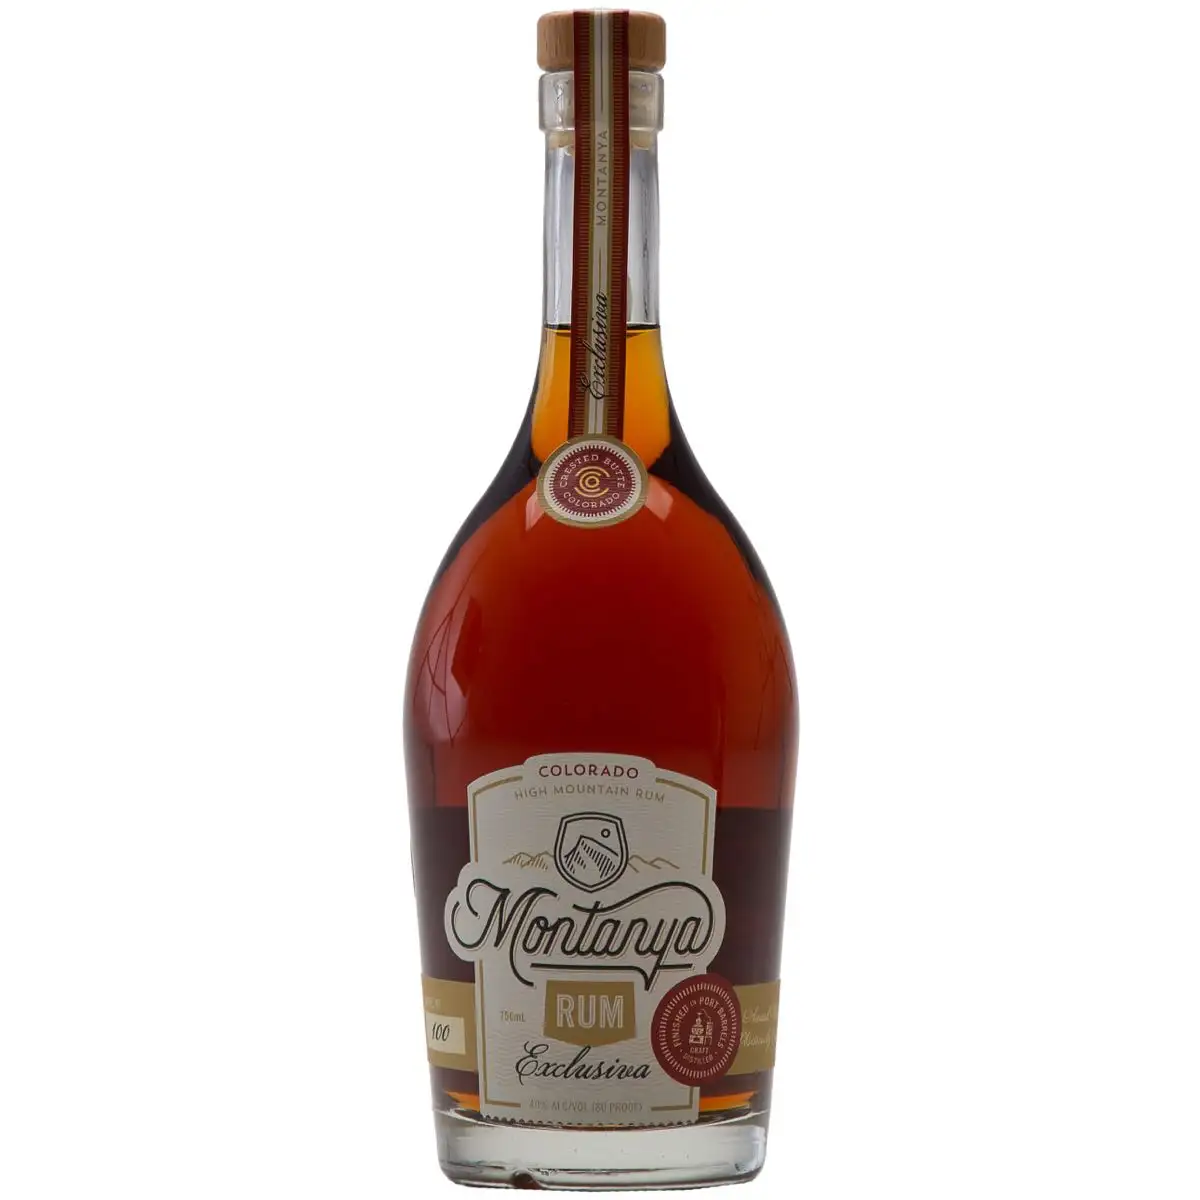 Image of the front of the bottle of the rum Rum Exclusiva